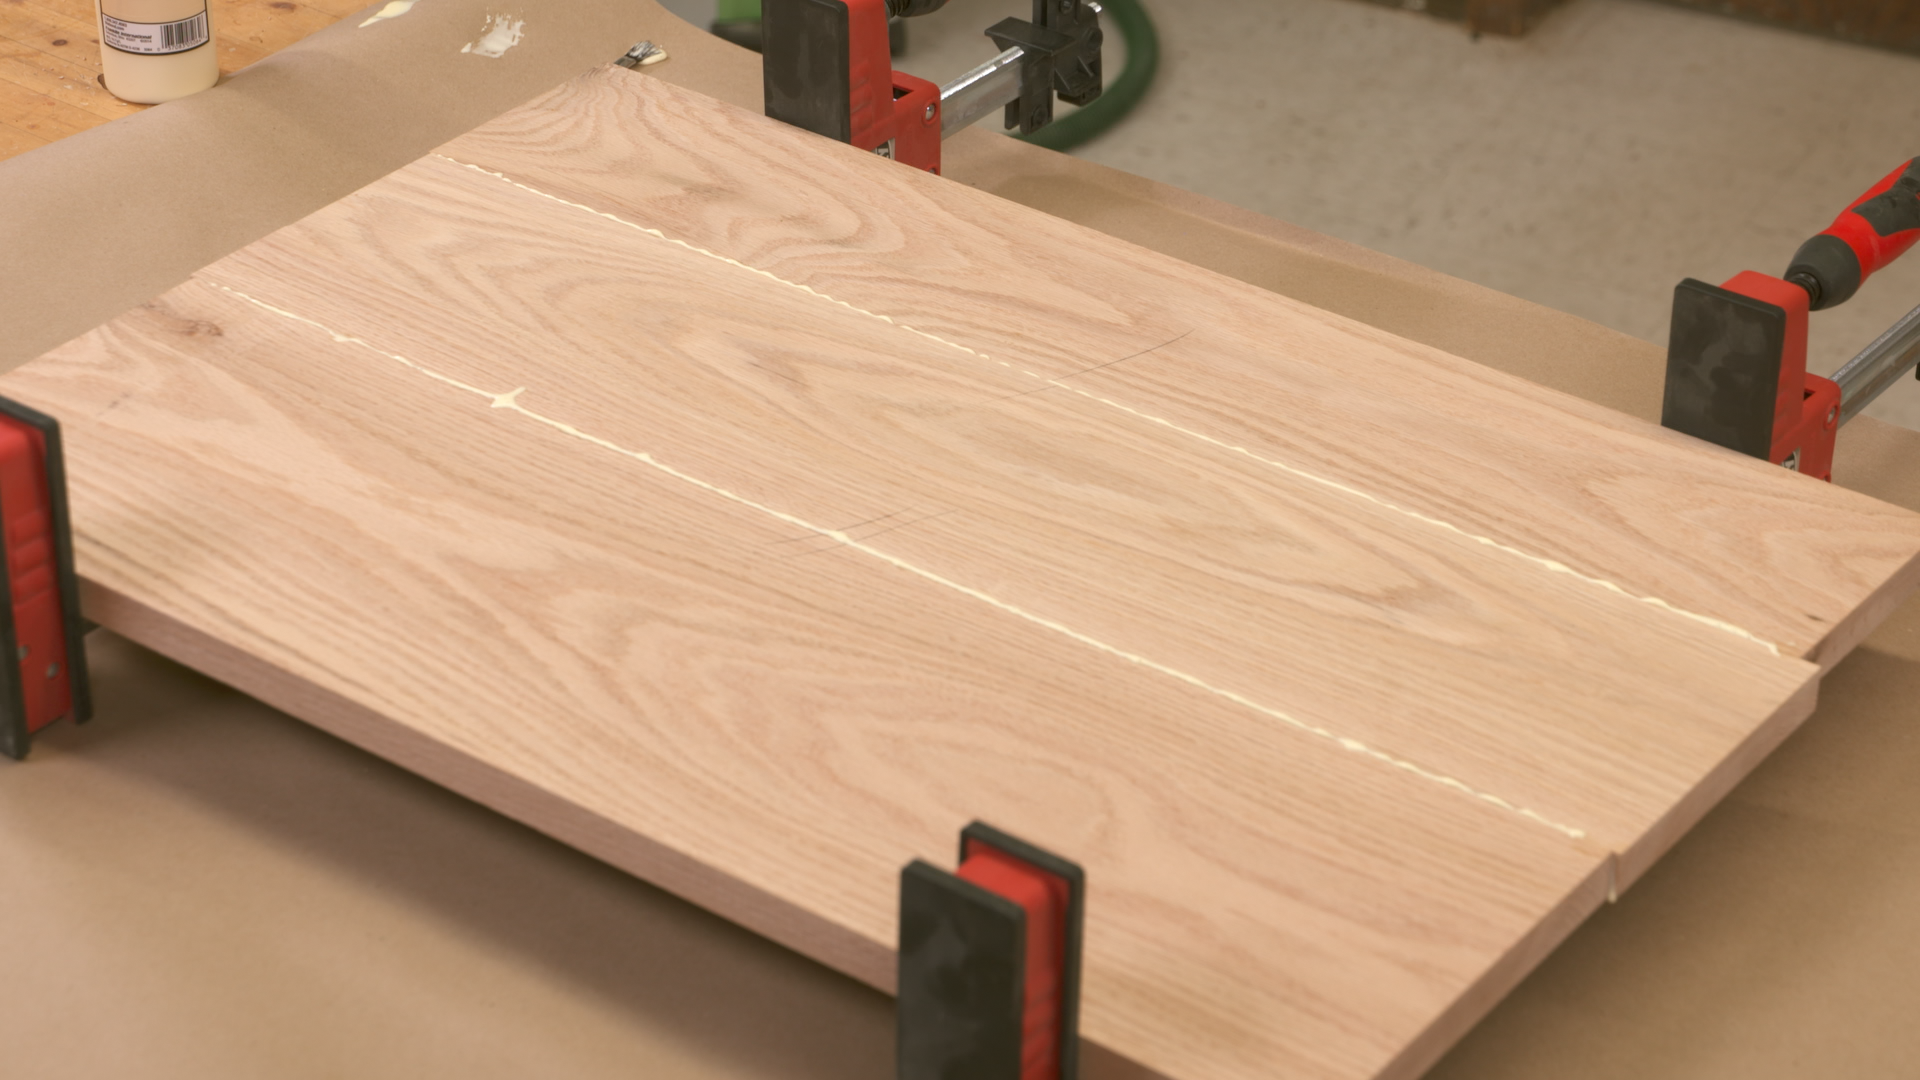 Tips for a Panel Glue Up